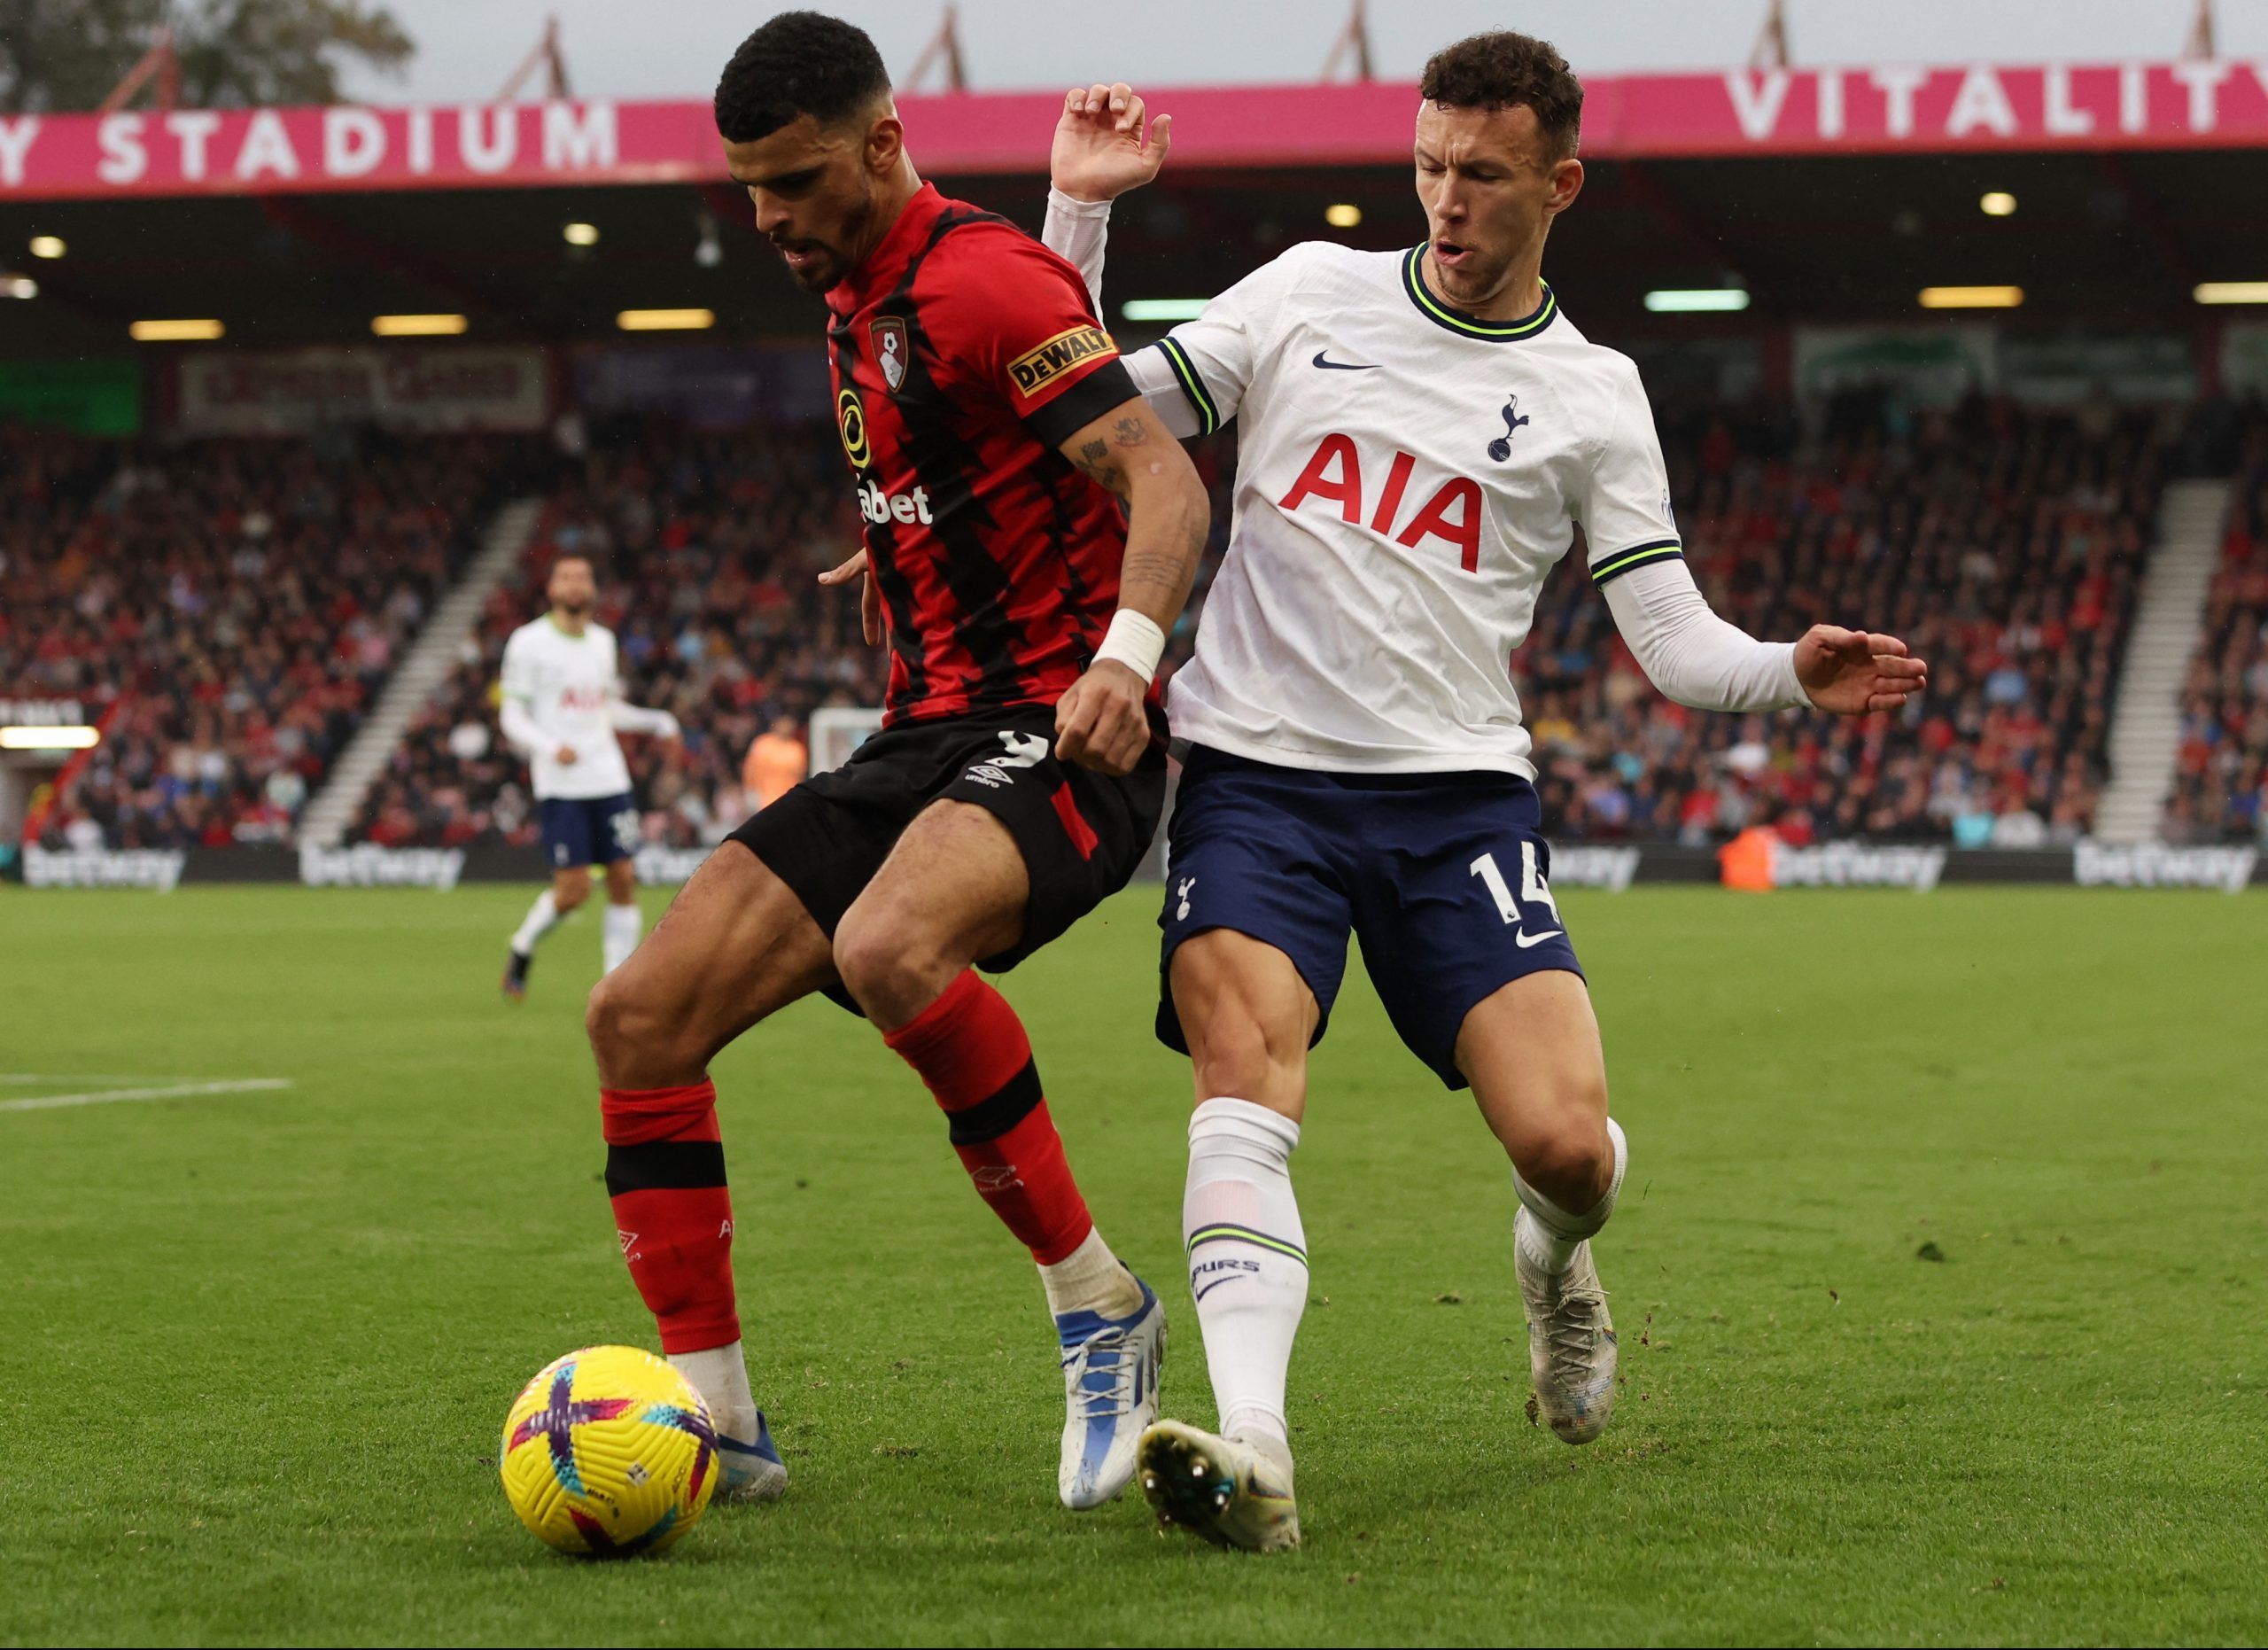 Soccer Football - Premier League - AFC Bournemouth v Tottenham Hotspur - Vitality Stadium, Bournemouth, Britain - October 29, 2022 AFC Bournemouth's Dominic Solanke in action with Tottenham Hotspur's Ivan Perisic Action Images via Reuters/Paul Childs EDITORIAL USE ONLY. No use with unauthorized audio, video, data, fixture lists, club/league logos or 'live' services. Online in-match use limited to 75 images, no video emulation. No use in betting, games or single club /league/player publications. 